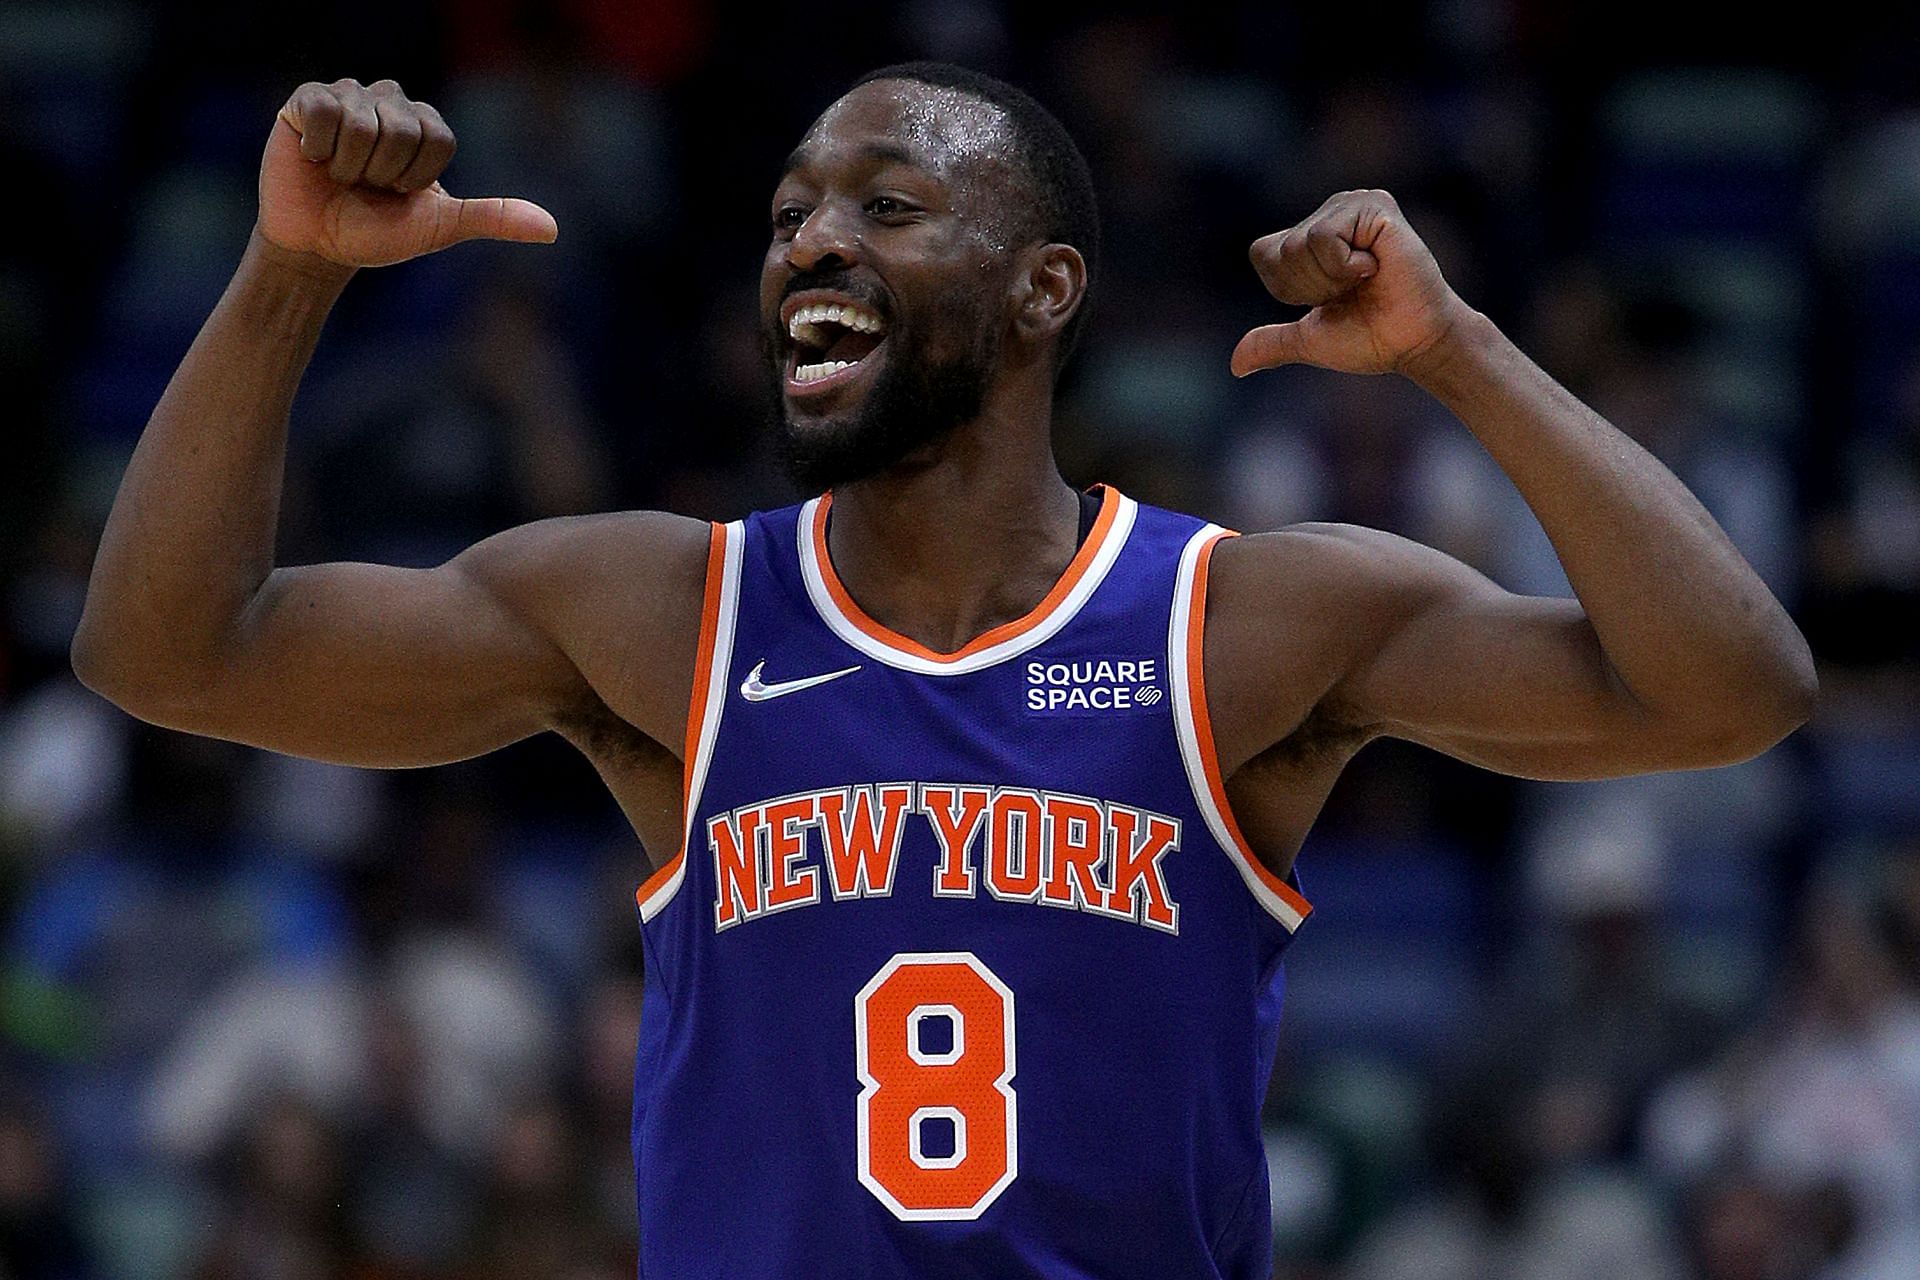 Kemba Walker #8 of the New York Knicks reacts after scoring a three-point basket during the fourth quarter of a NBA game against the New Orleans Pelicans at Smoothie King Center on October 30, 2021 in New Orleans, Louisiana.